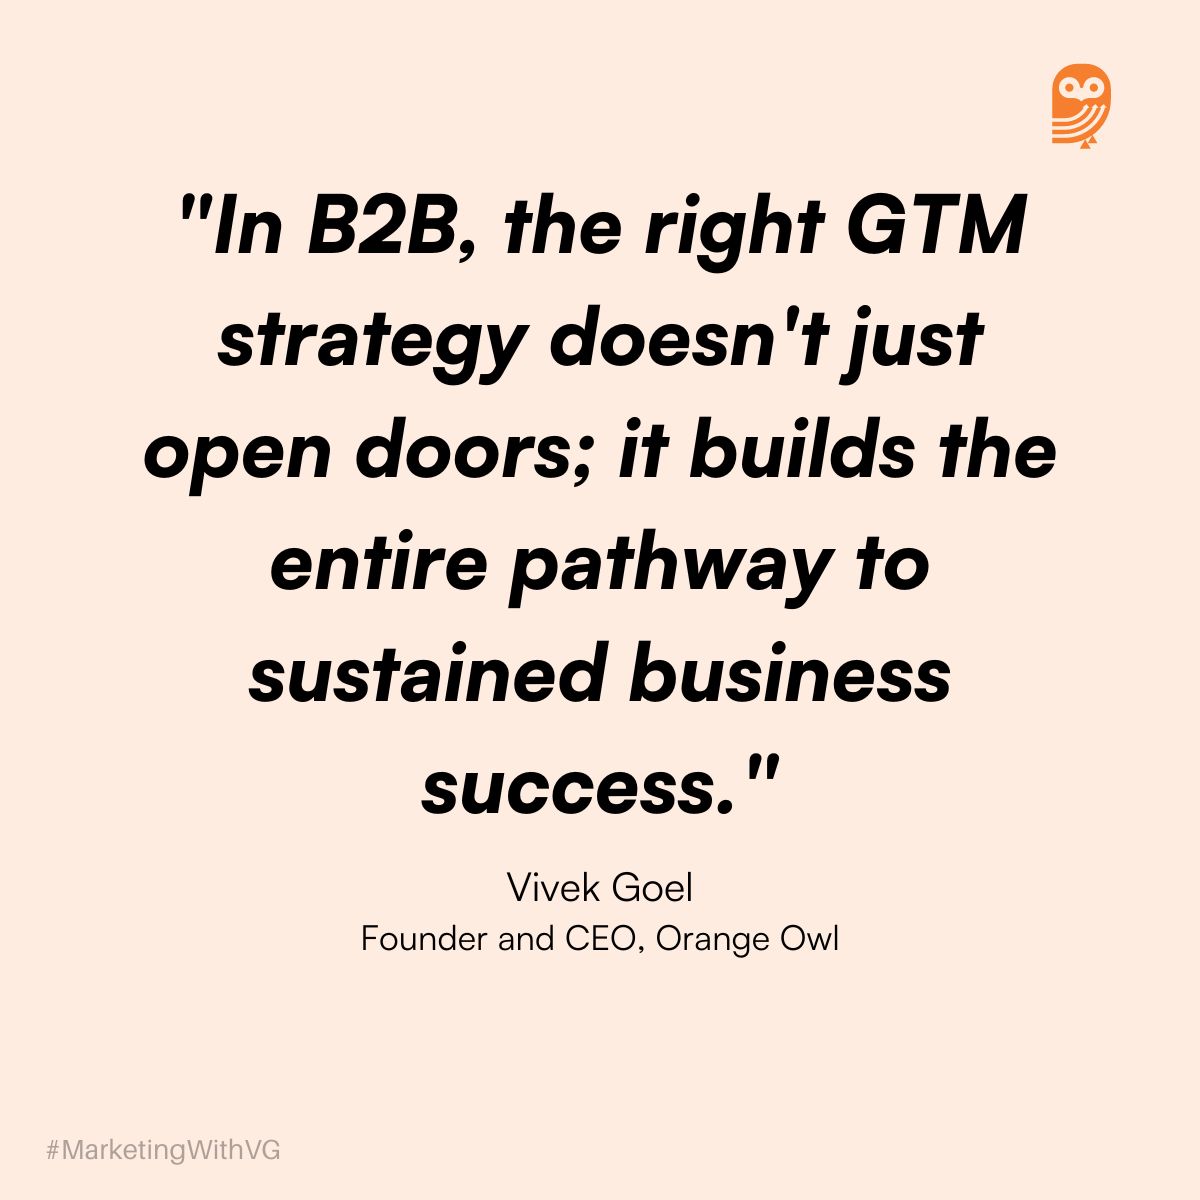 Vivek Quote on B2B Strategy